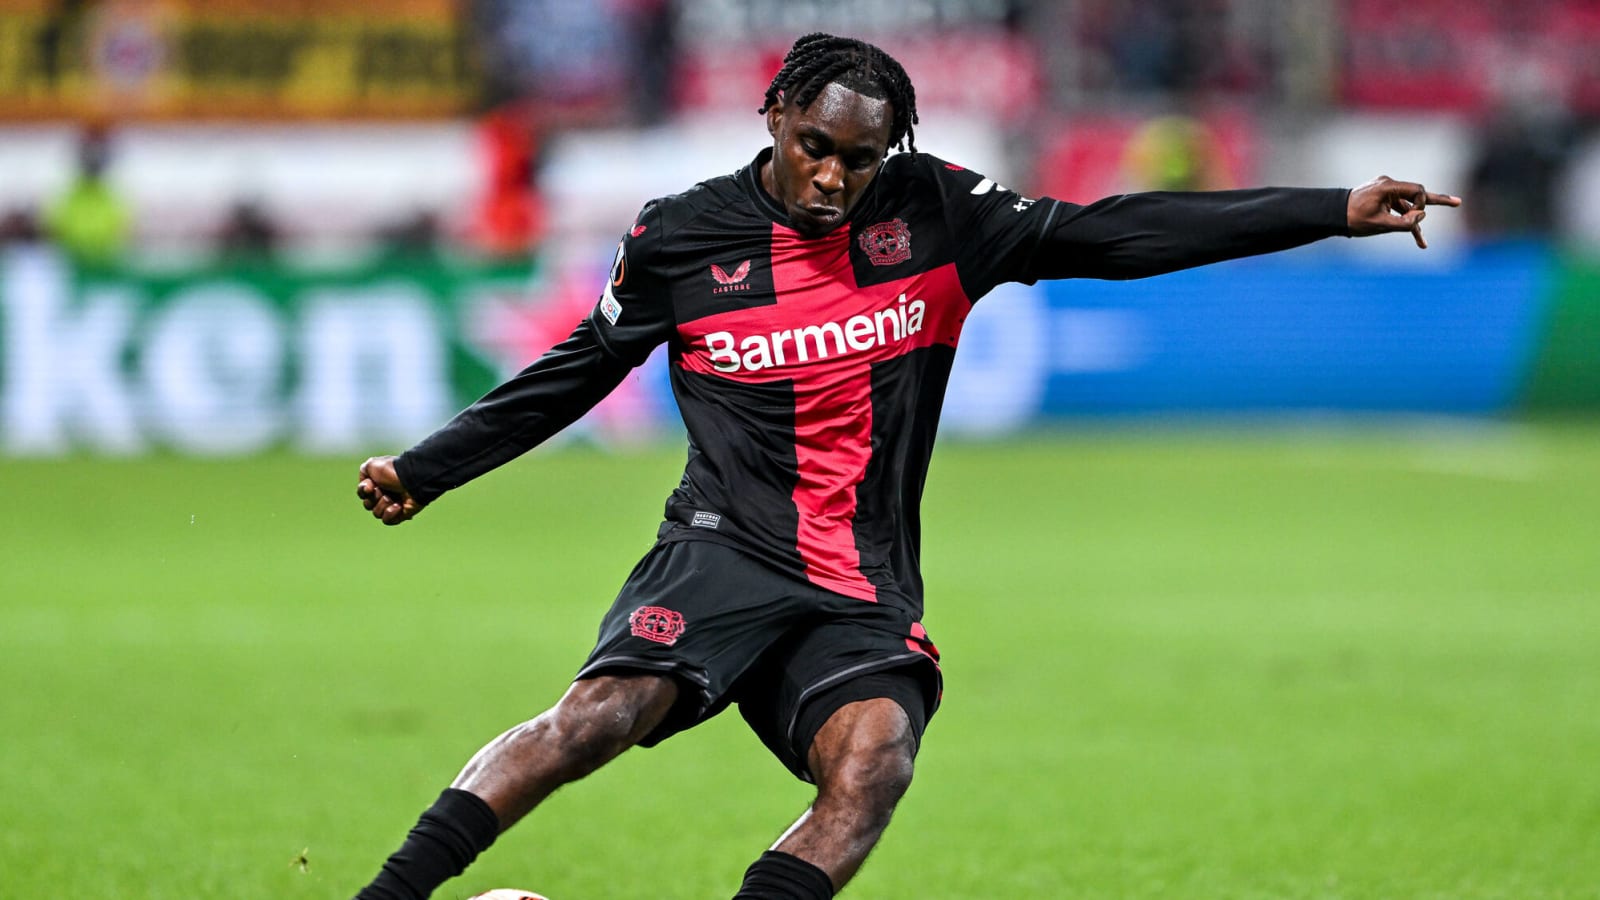 Has Manchester City made their move to secure a Bayer Leverkusen full-back?